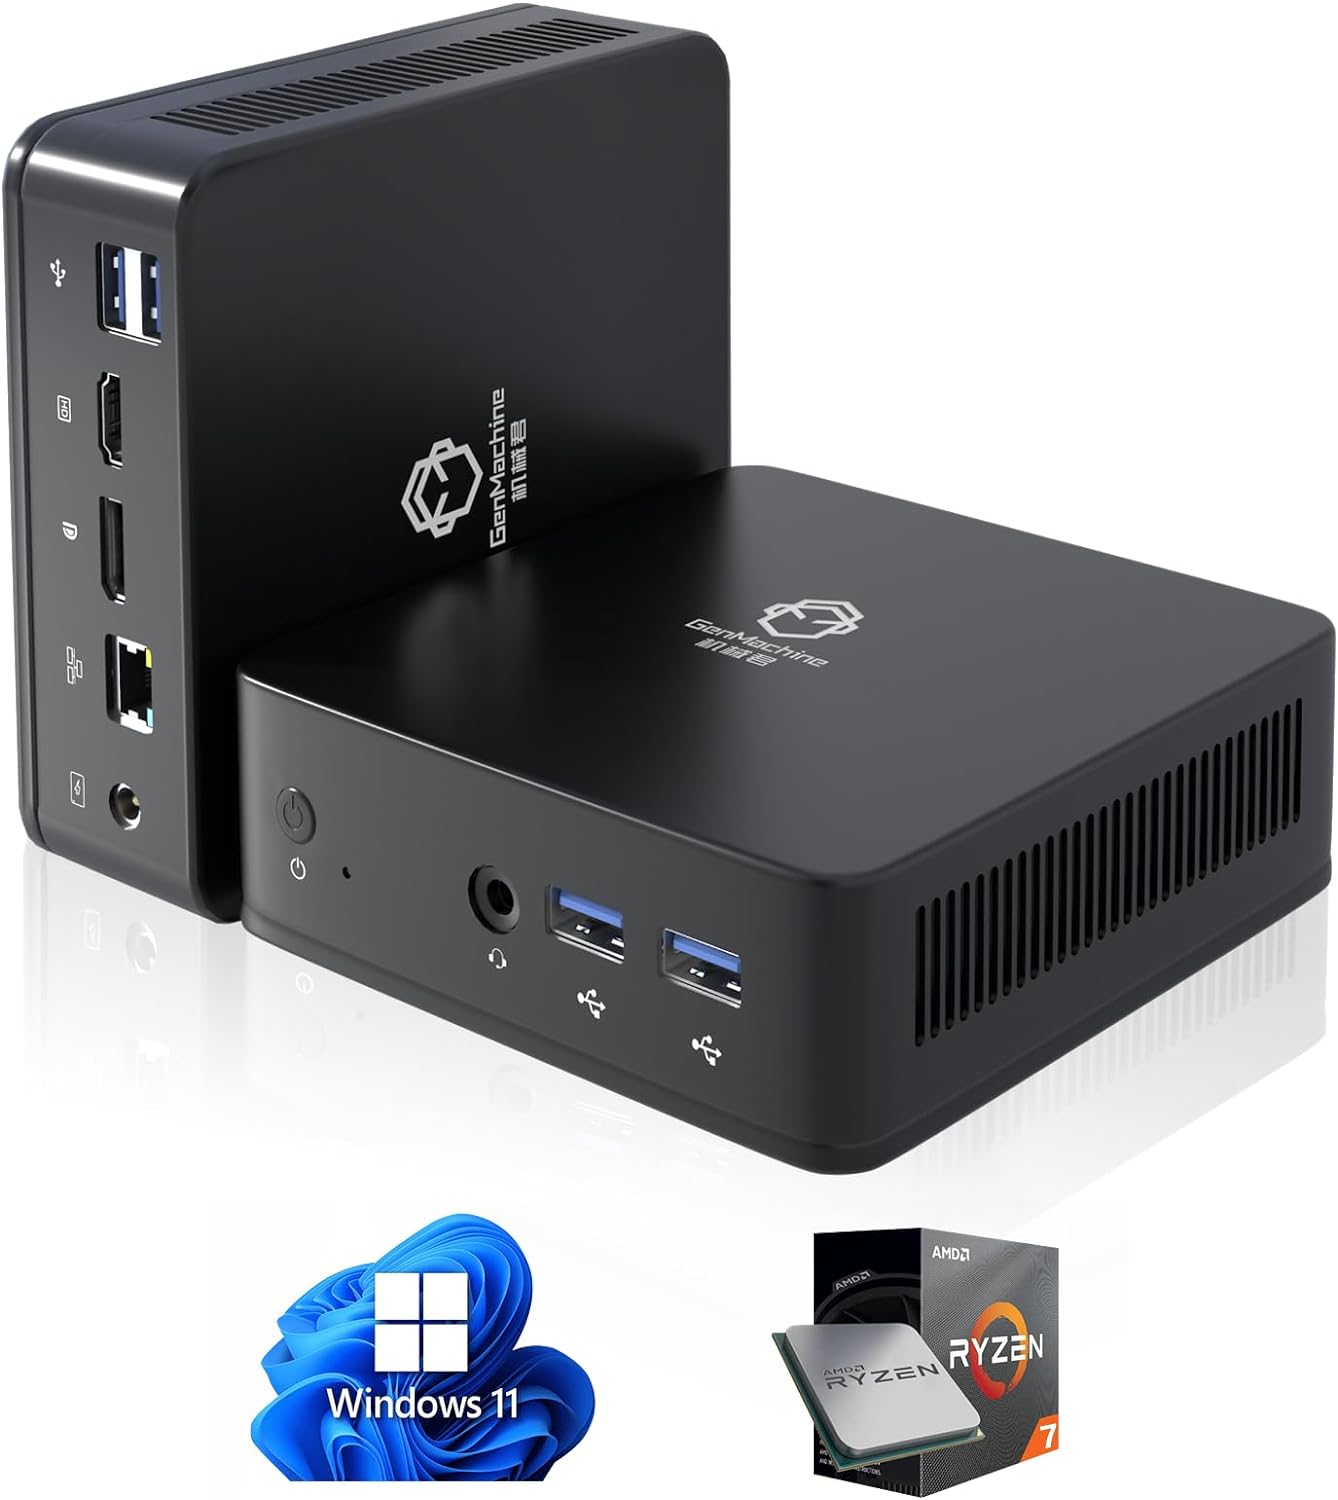 Mini PC, Home Theater PC, Windows 11 Pro Mini Desktop Computer with AMD 3750H (Up to 4.0 GHz) 16GB DDR4+512GB M.2 NVMe SSD, DP 4K Dual Screen, Small Form Factor for Business, Office, Workstation